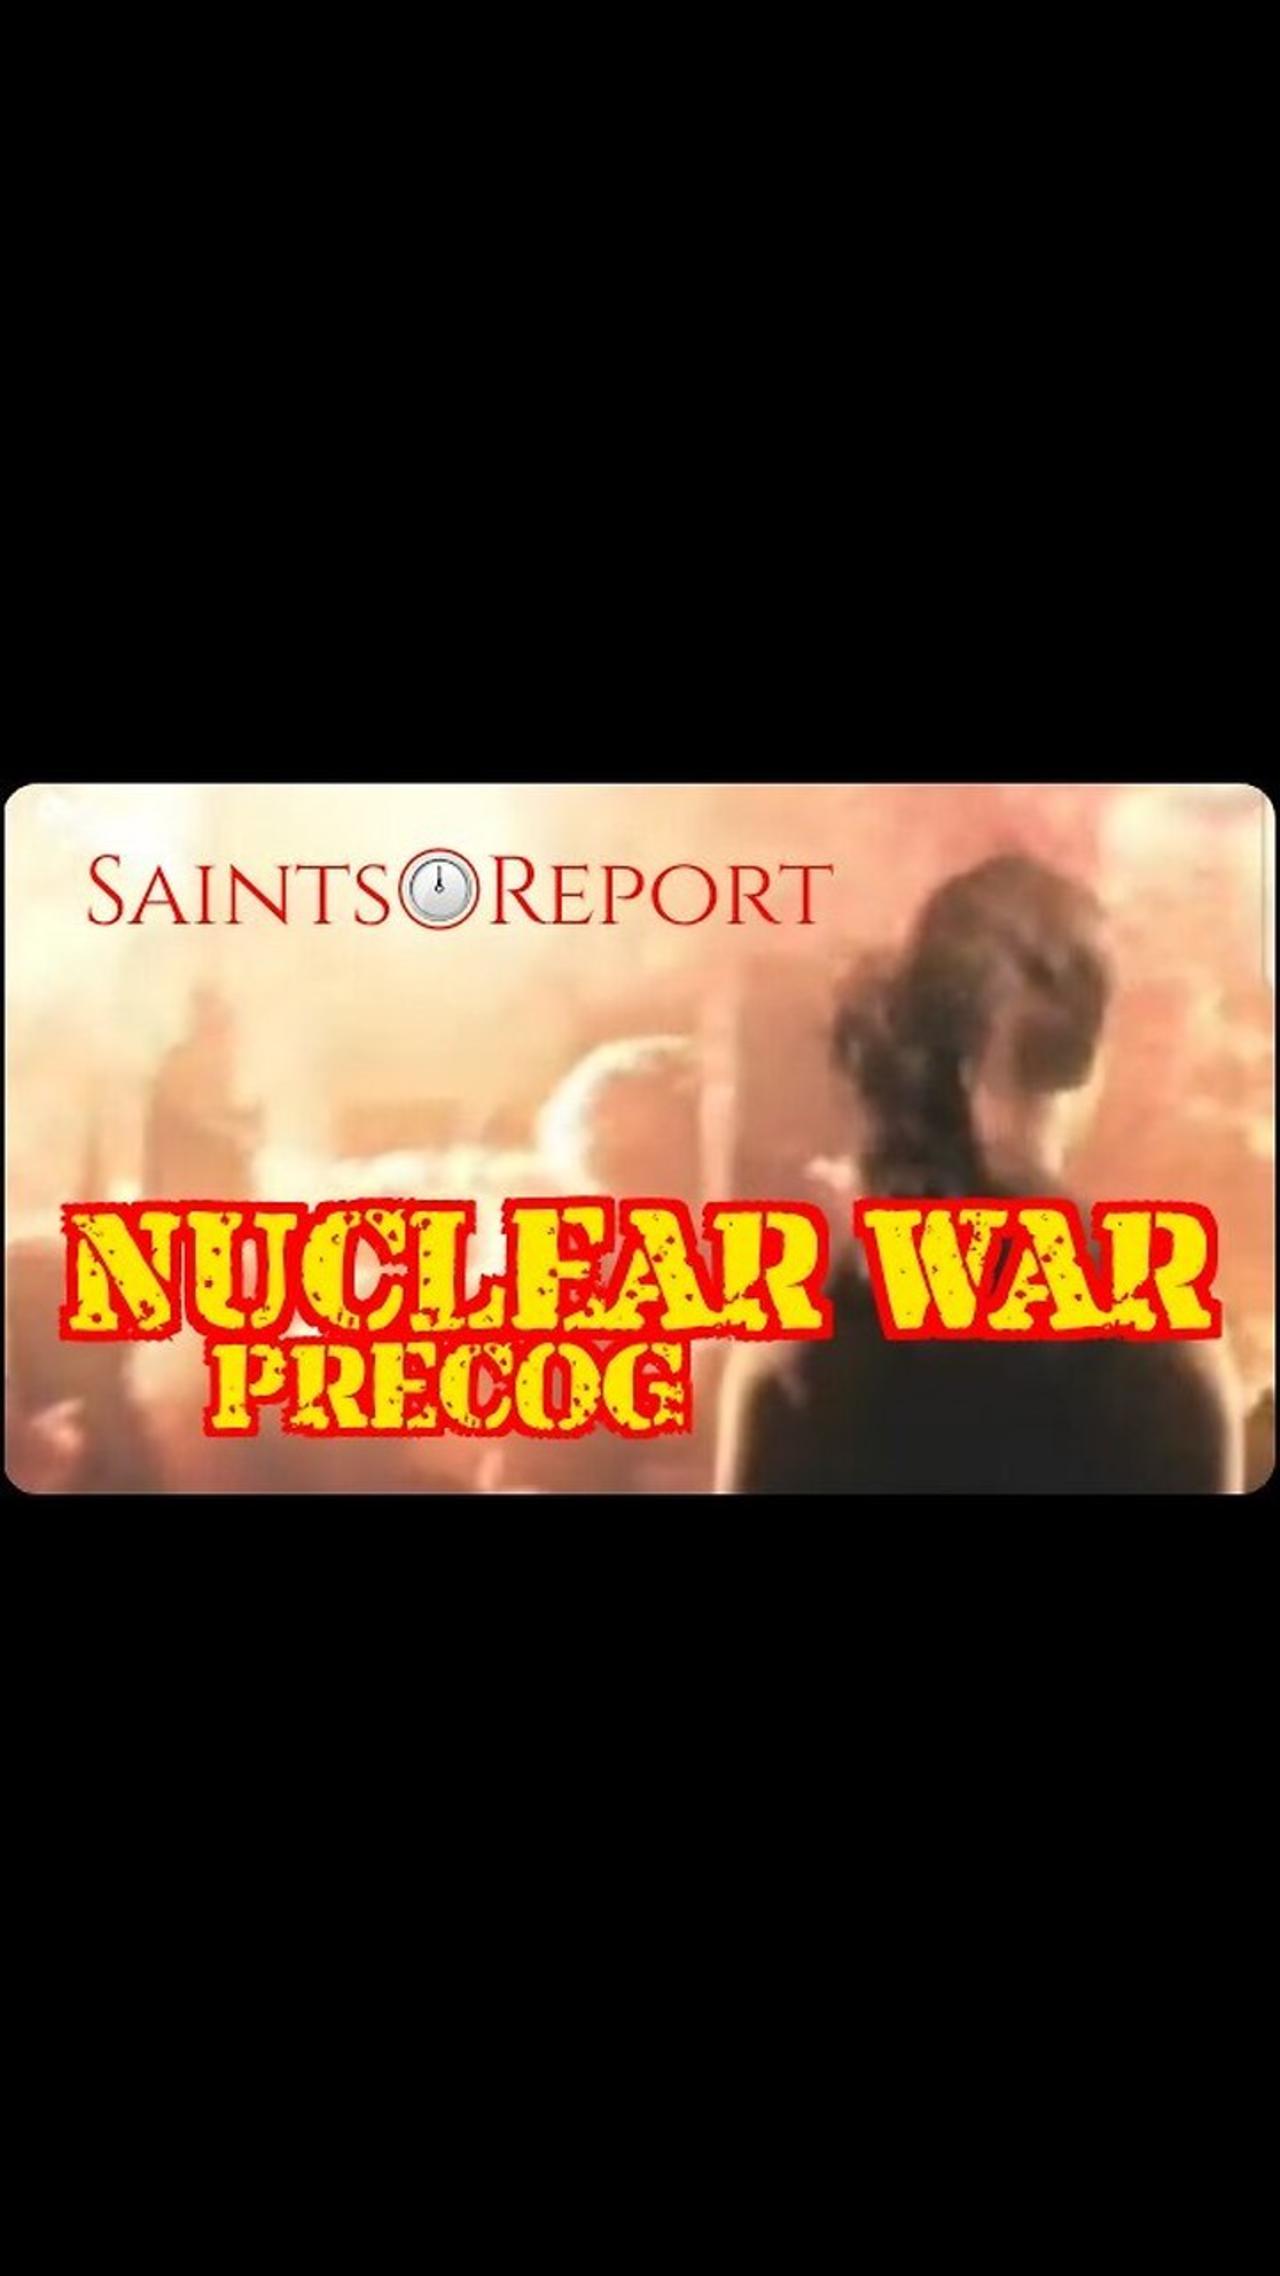 A Nuclear Holocaust Preview ⏳